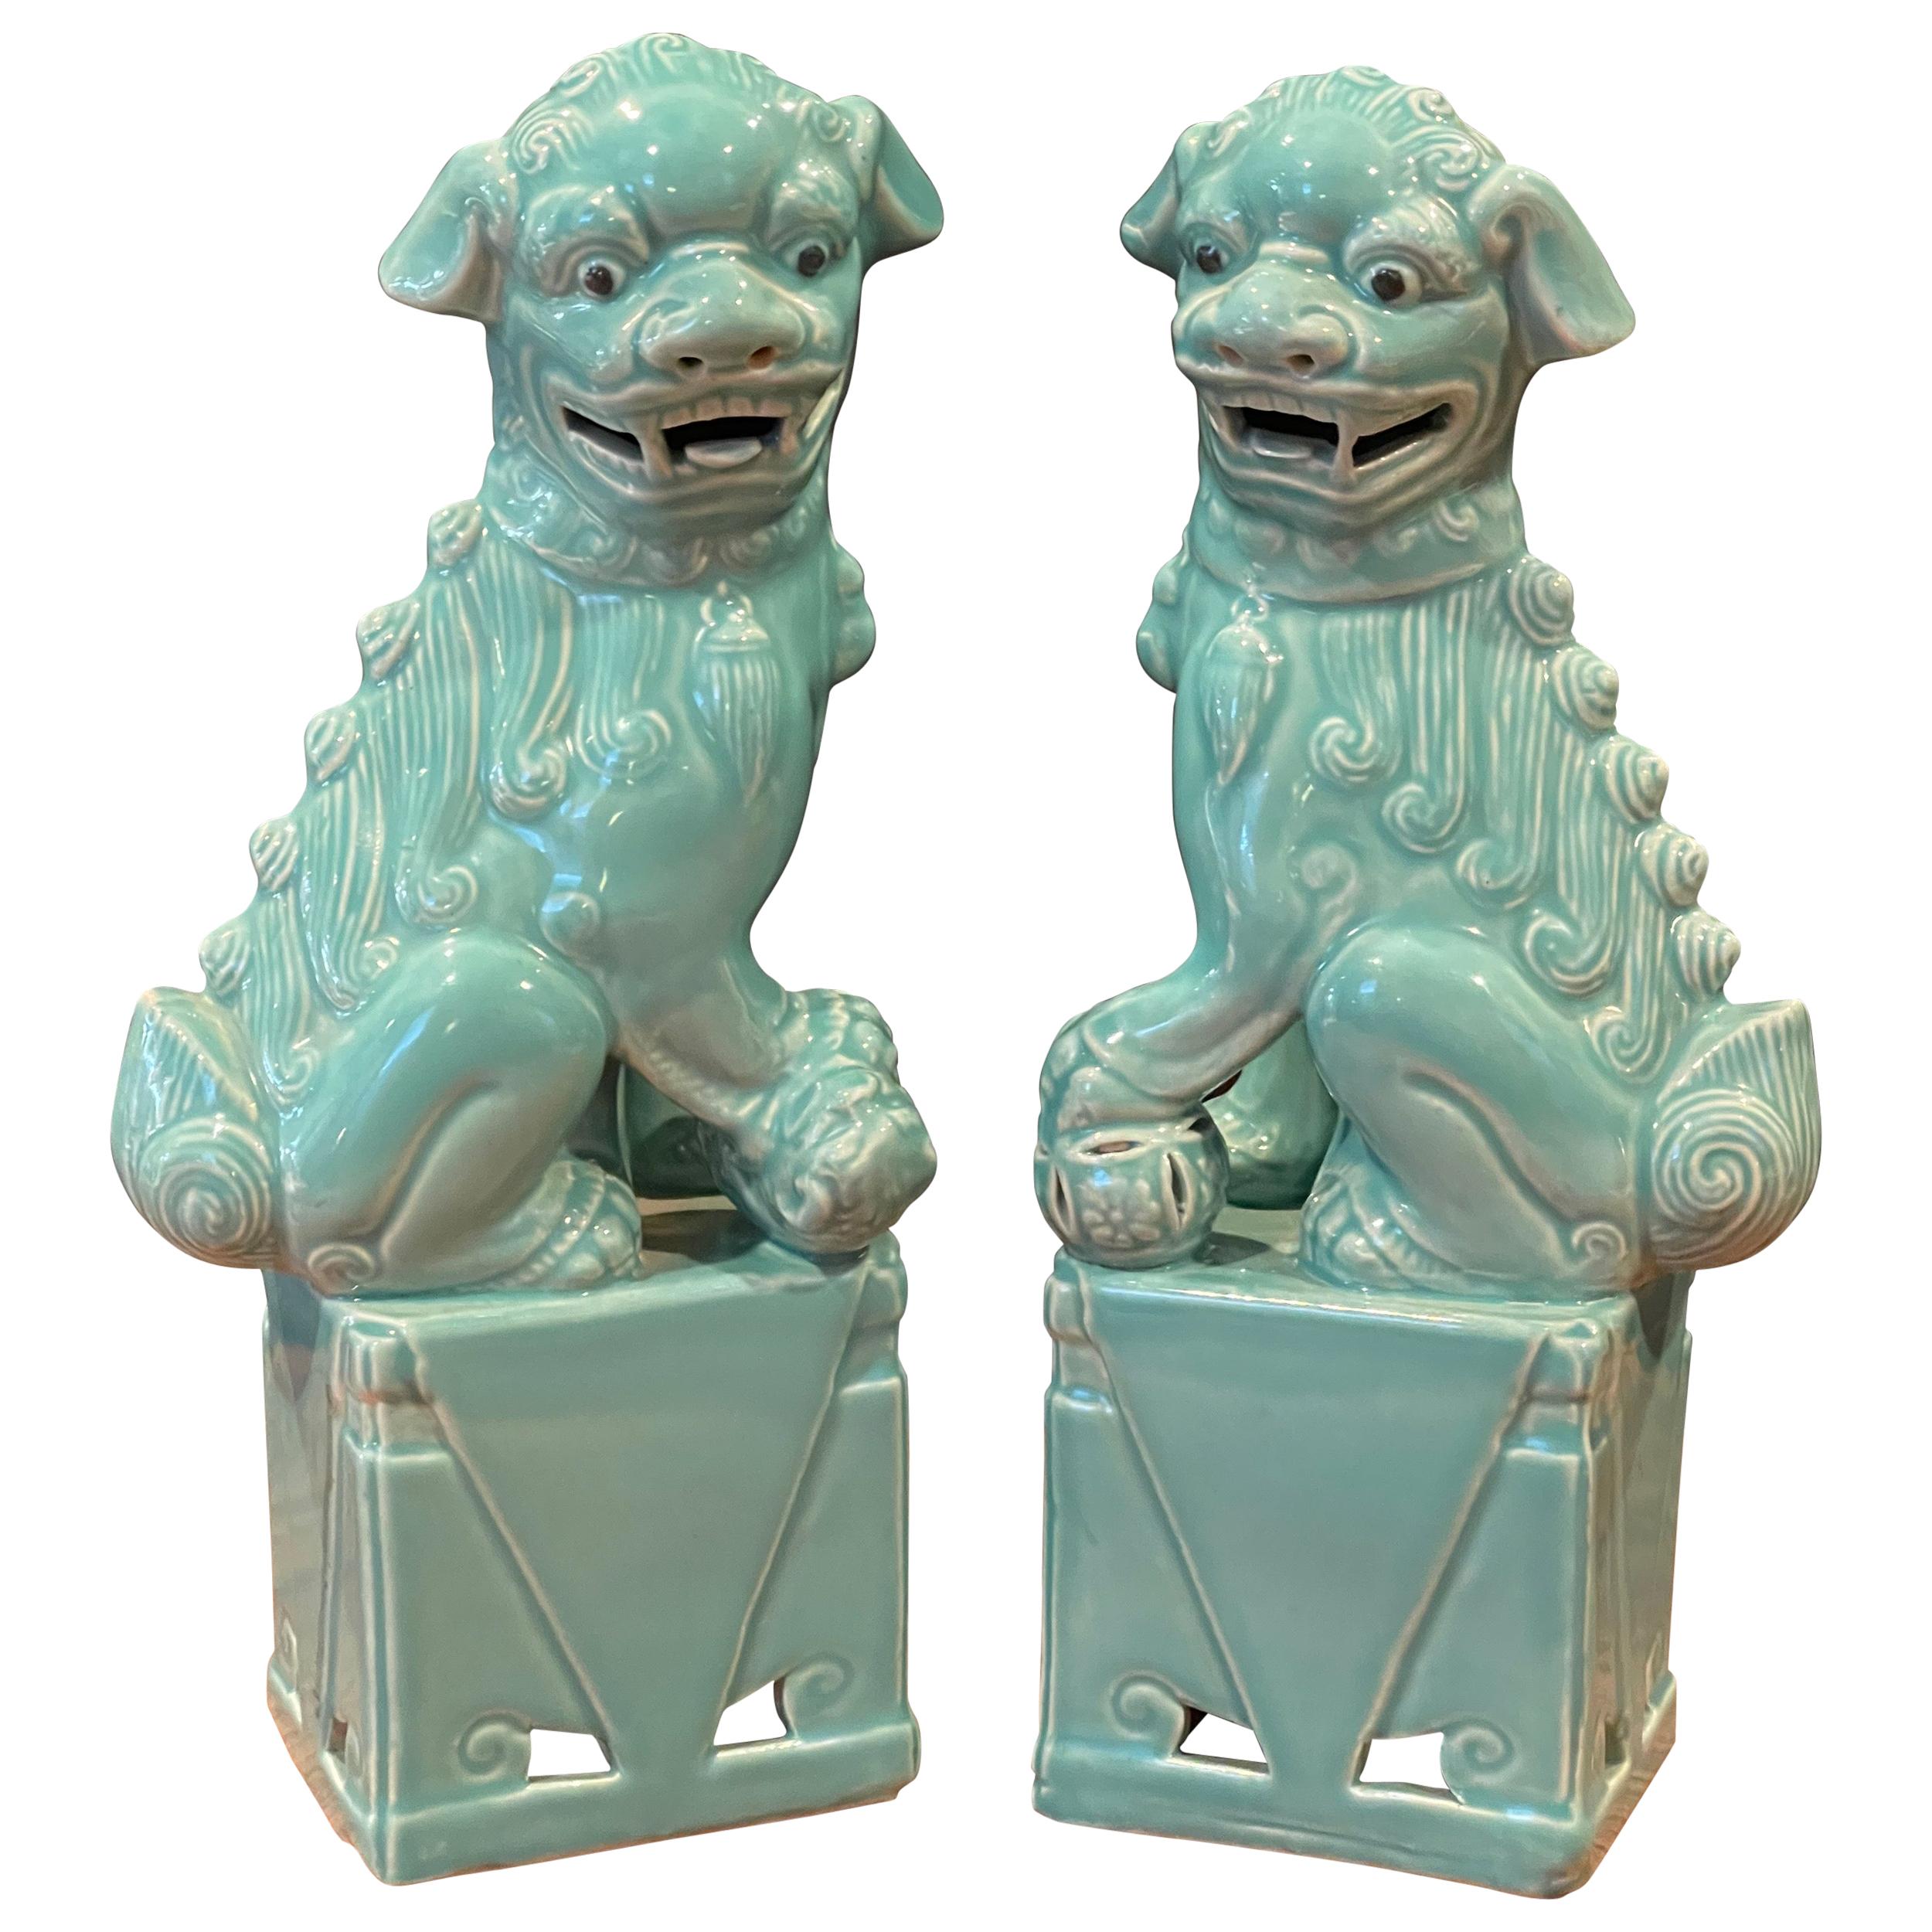 Pair of Midcentury Ceramic Foo Dogs / Bookends